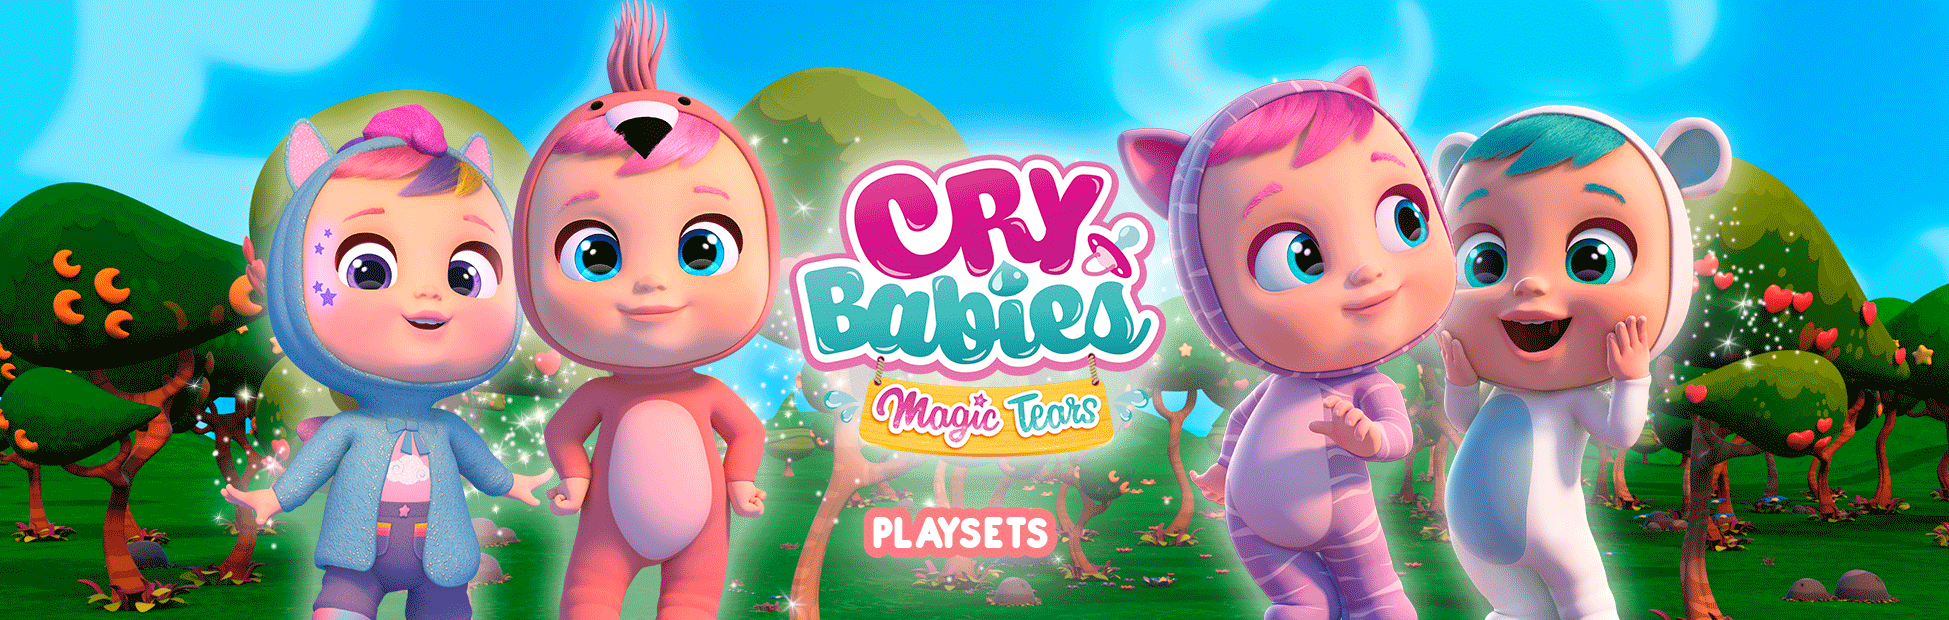 Banner IMC Toys - Promo Cry Babies 